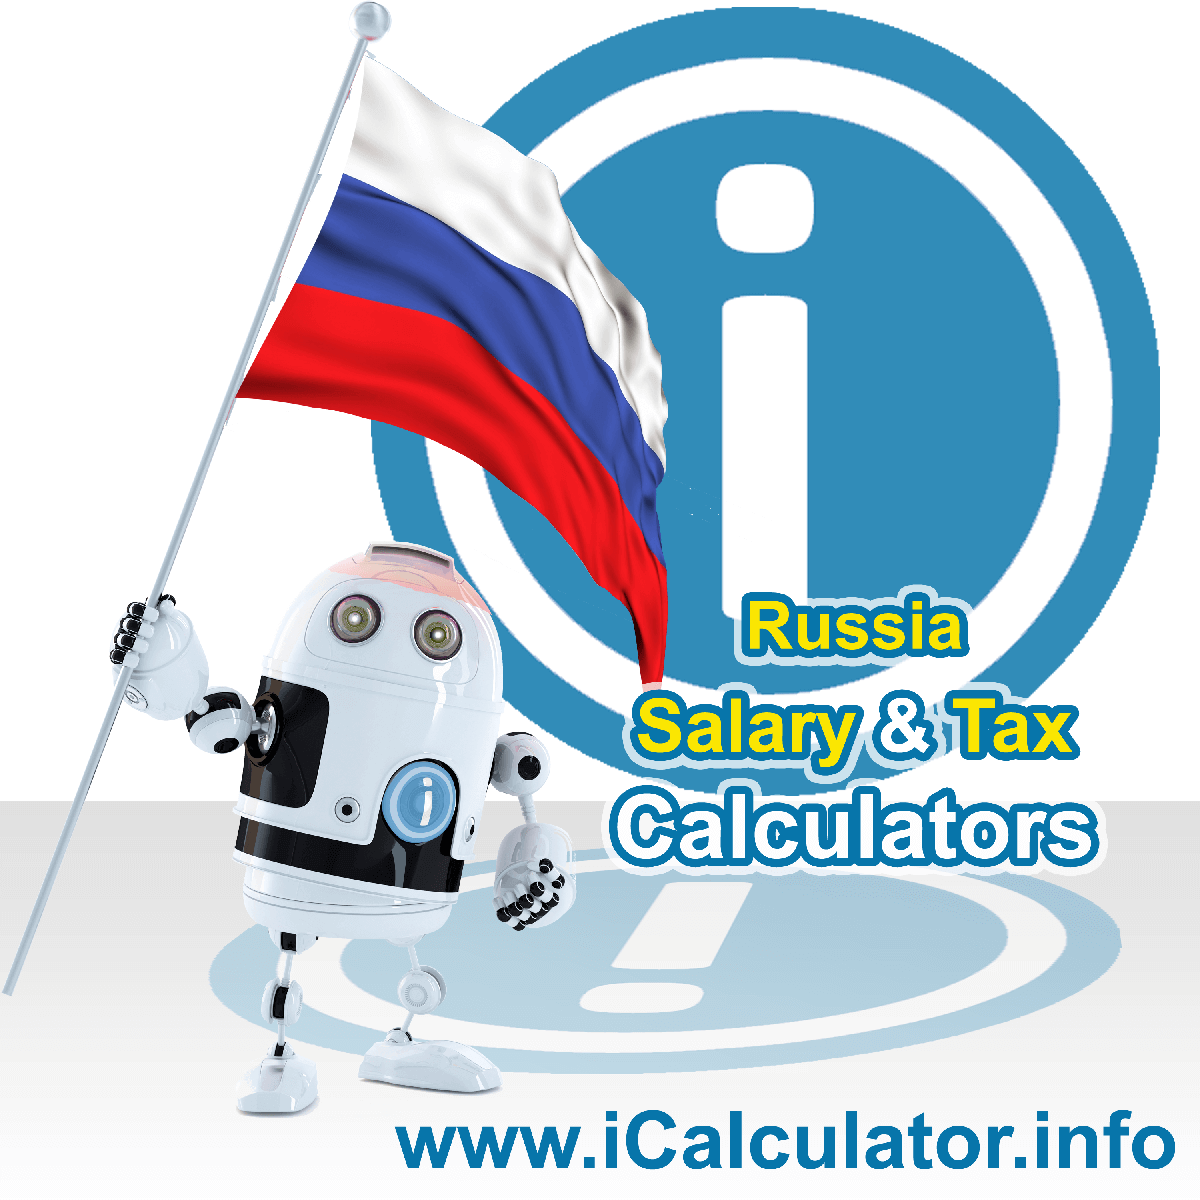 Russia Tax Calculator. This image shows the Russia flag and information relating to the tax formula for the Russia Salary Calculator